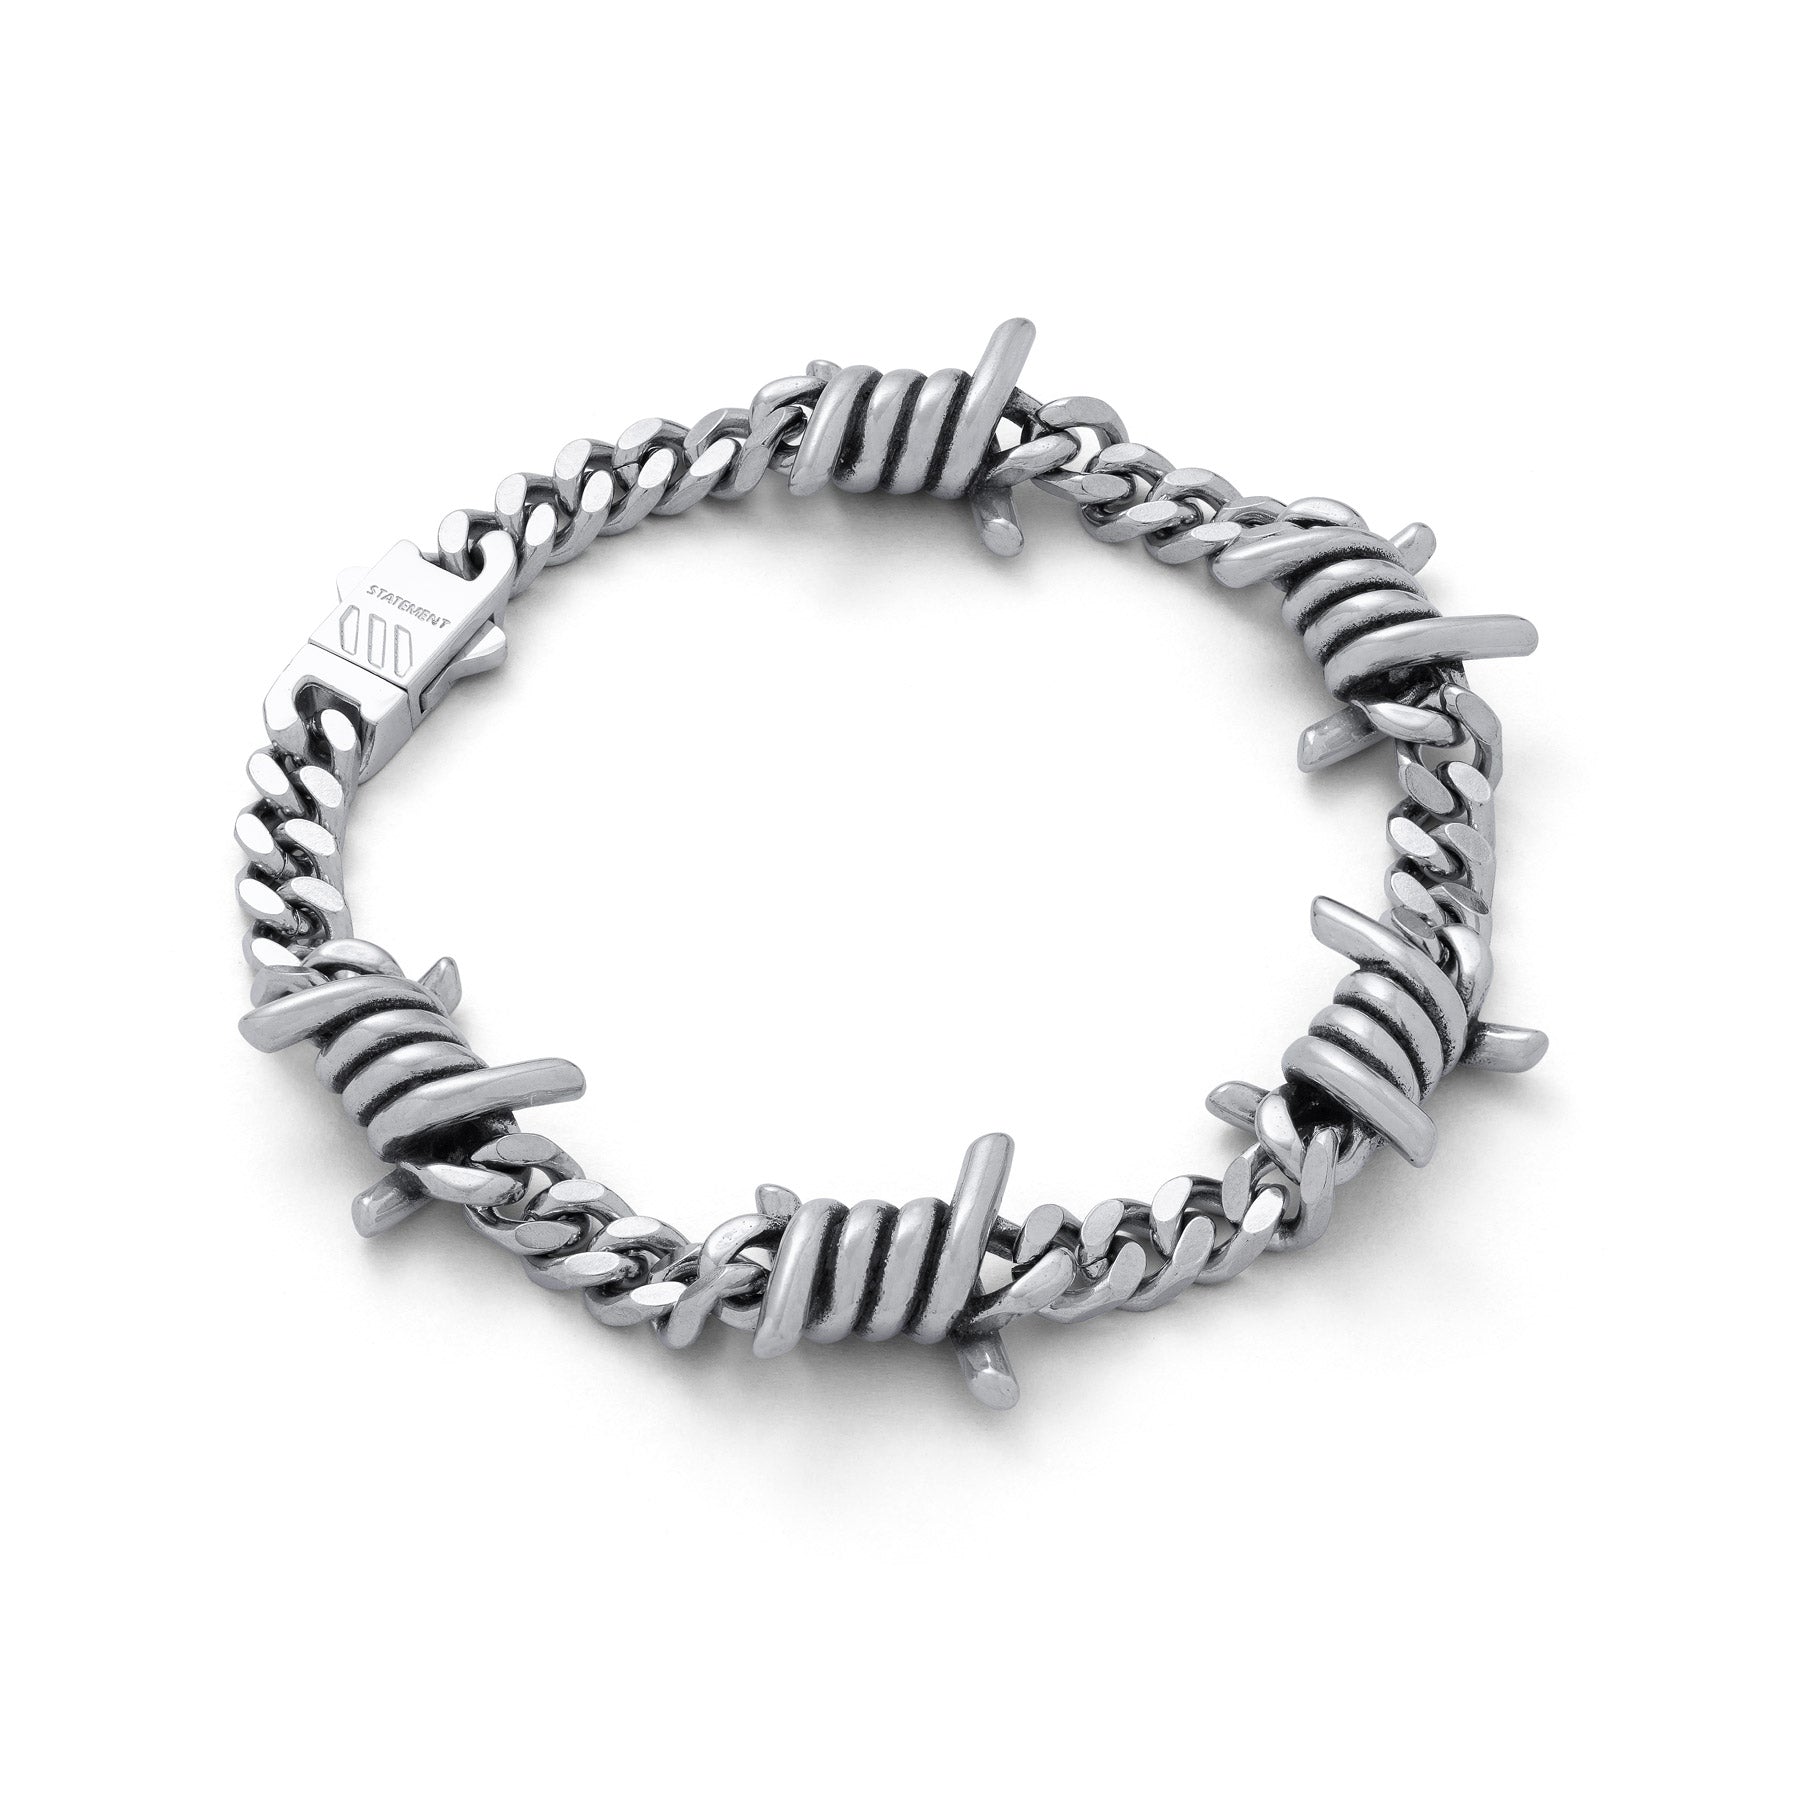 Silver barbed wire cuban link bracelet chain